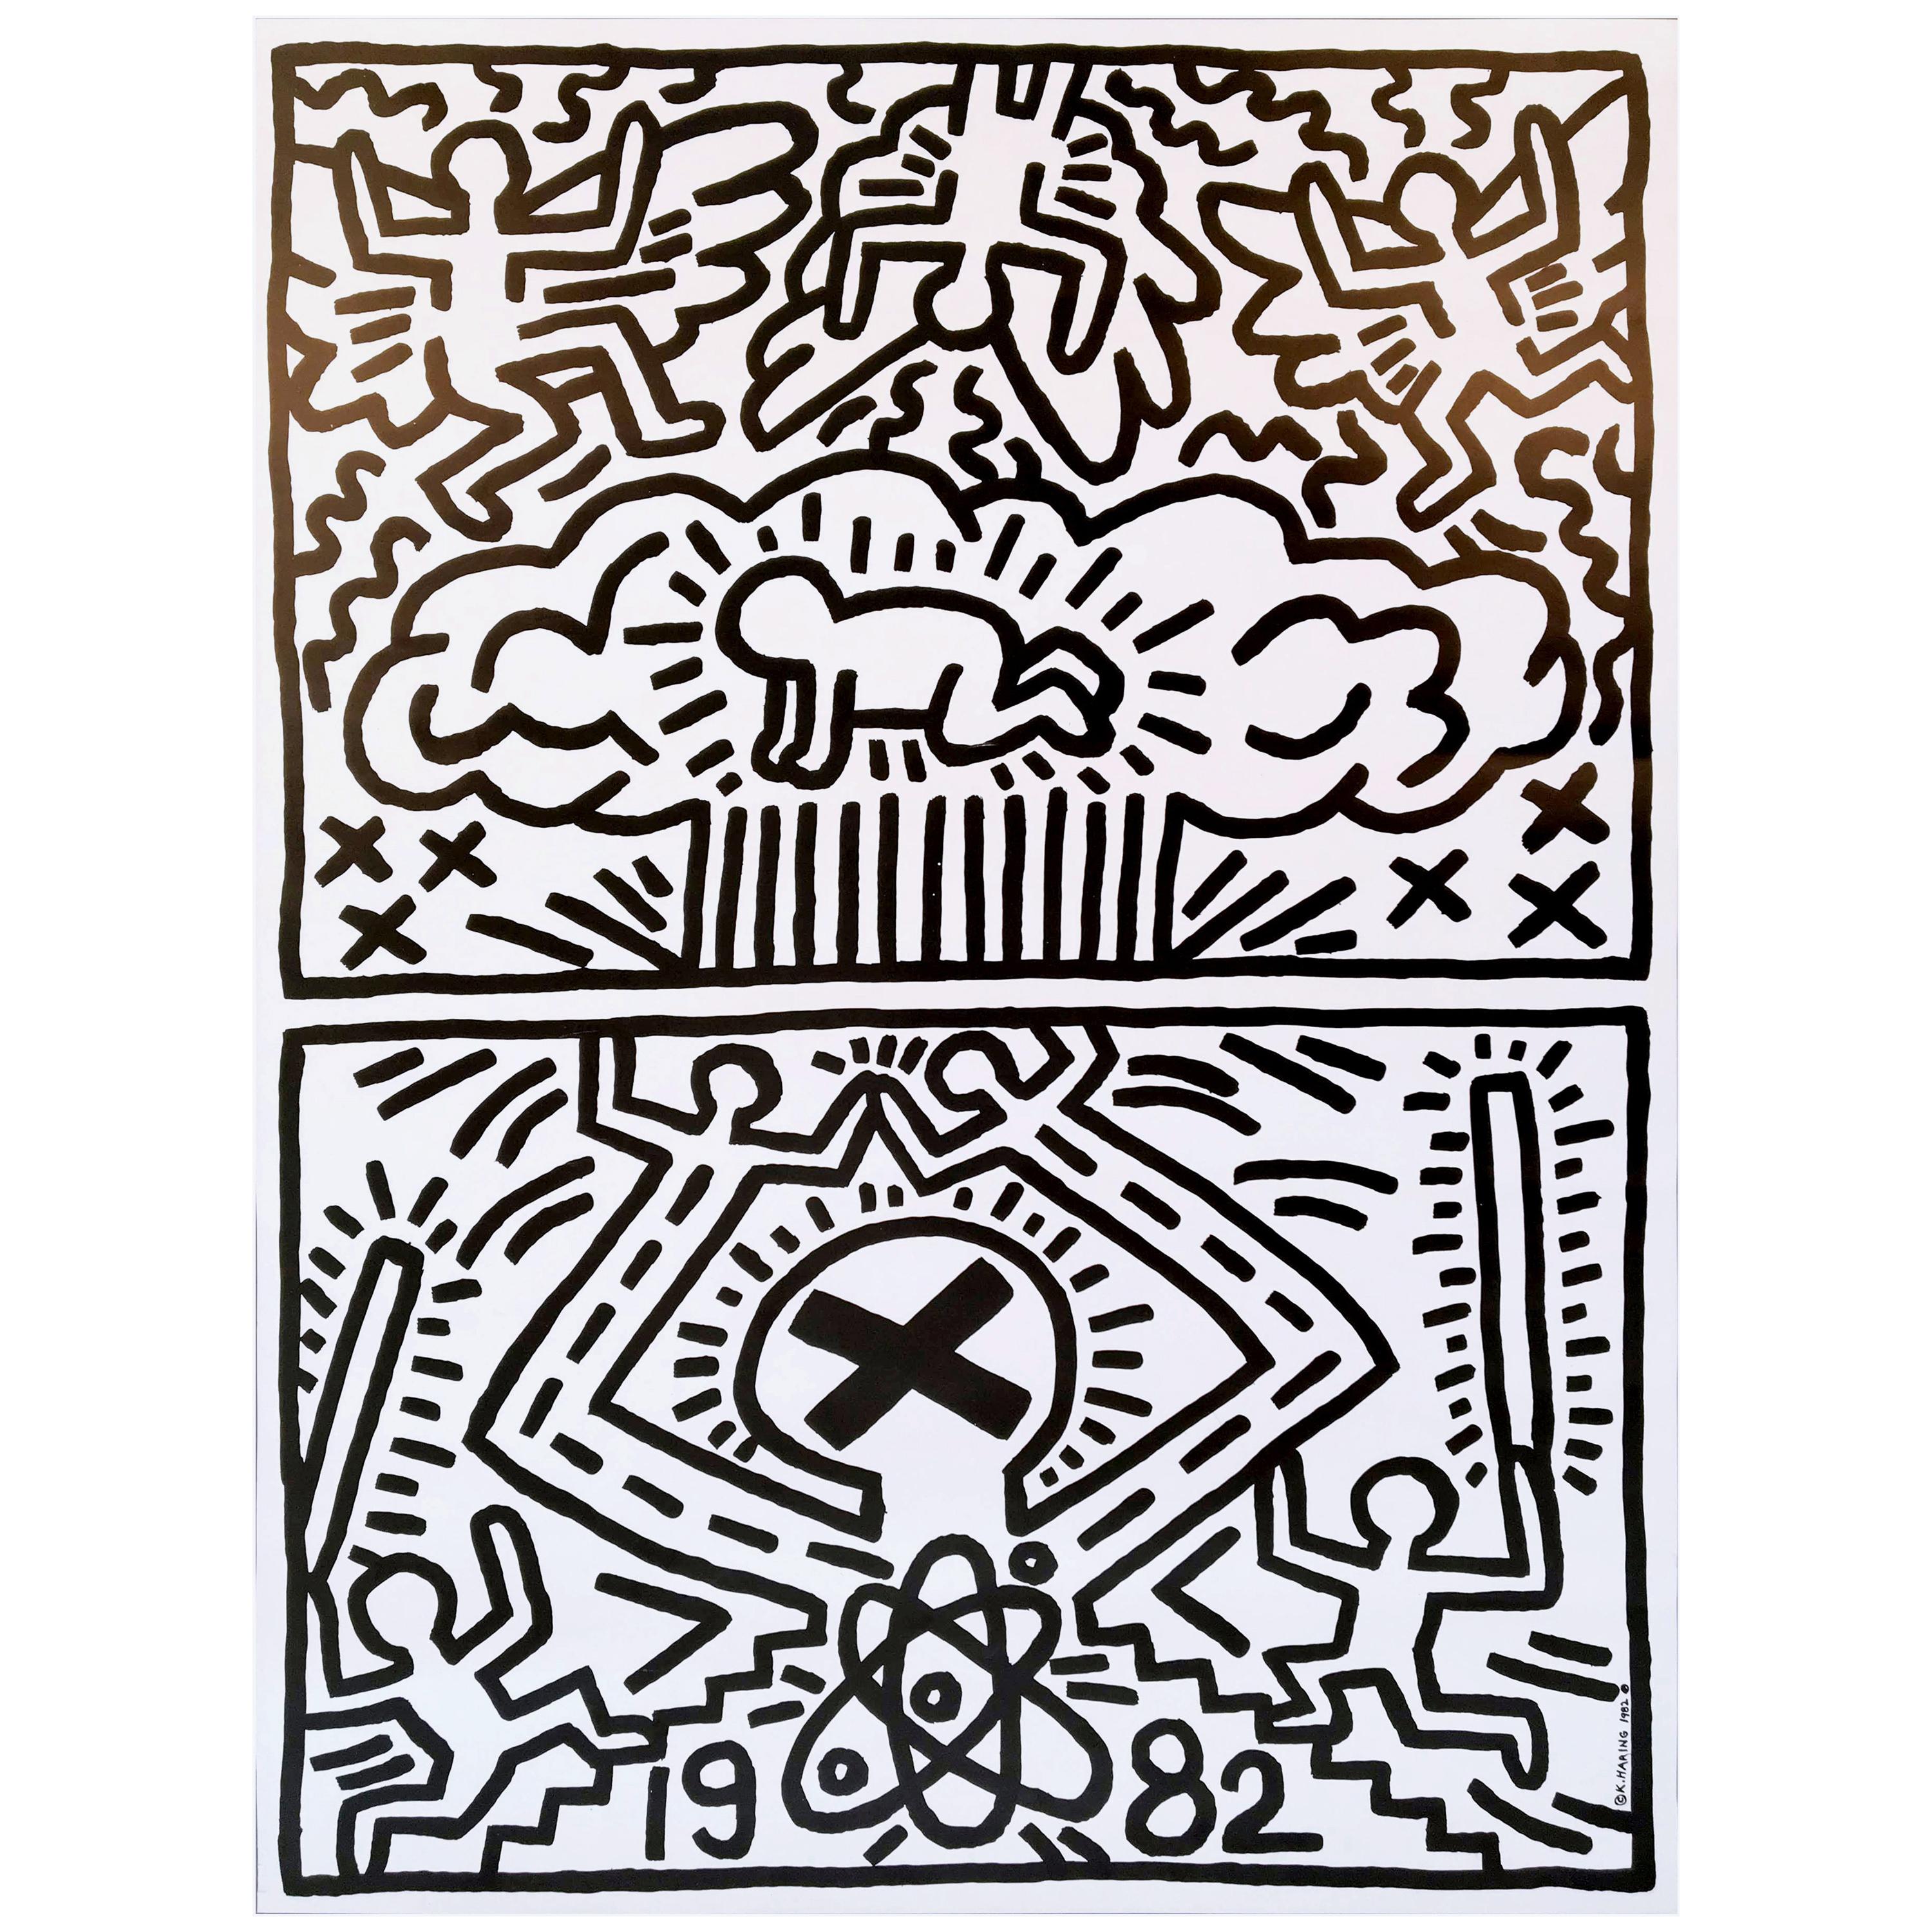 Keith Haring 'Nuclear Disarmament' Rare Original 1982 Poster Print on Fine Paper